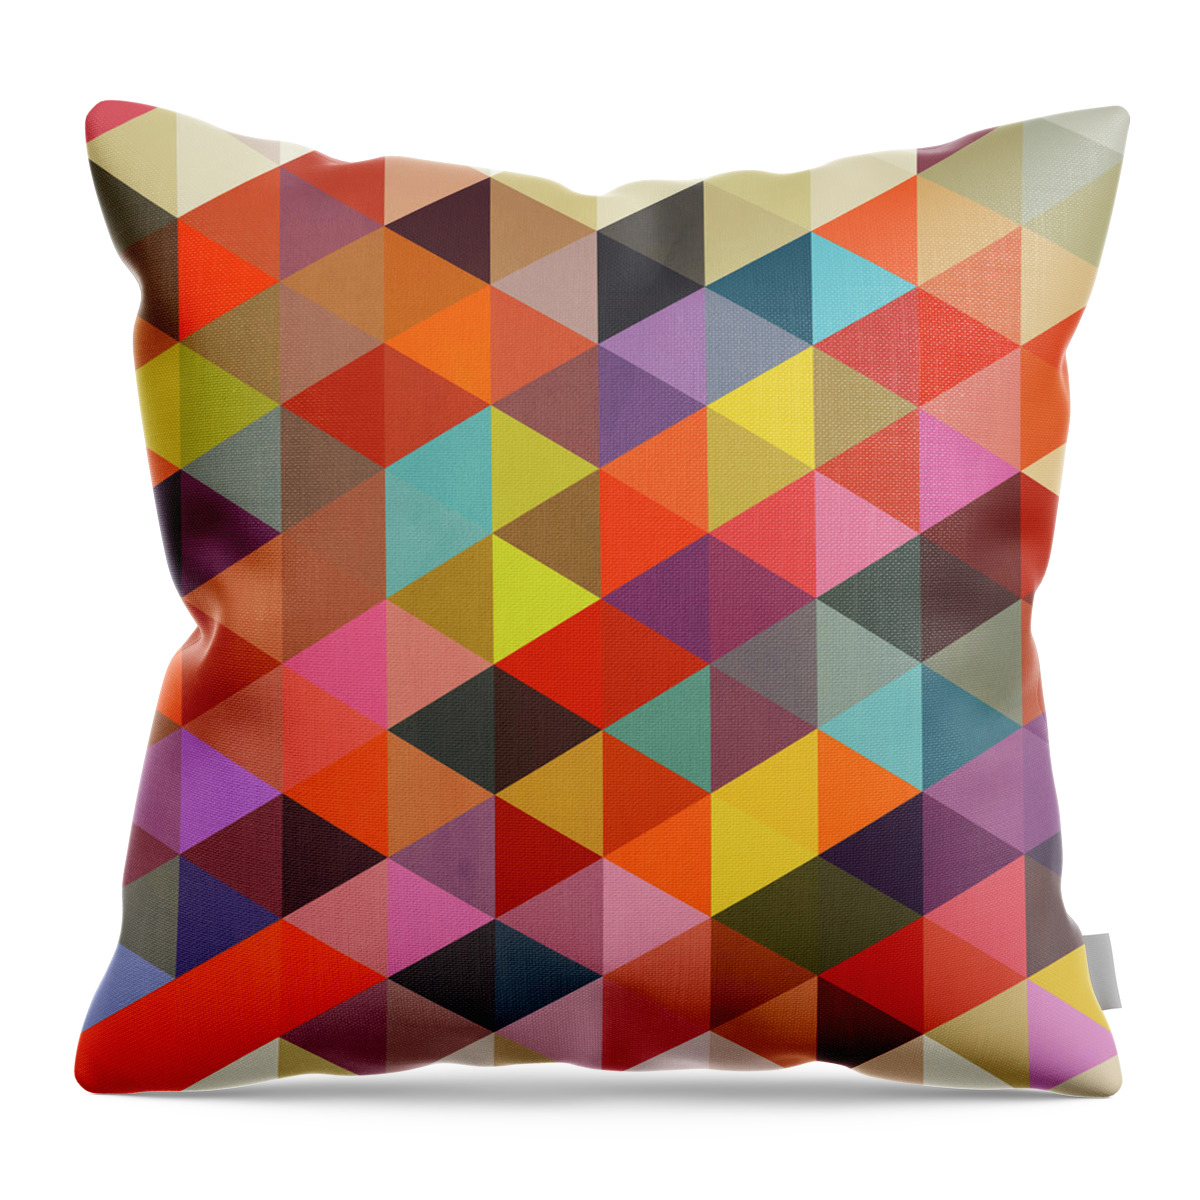 Contemporary Throw Pillow featuring the painting Geometric Shapes Abstract by Mark Ashkenazi